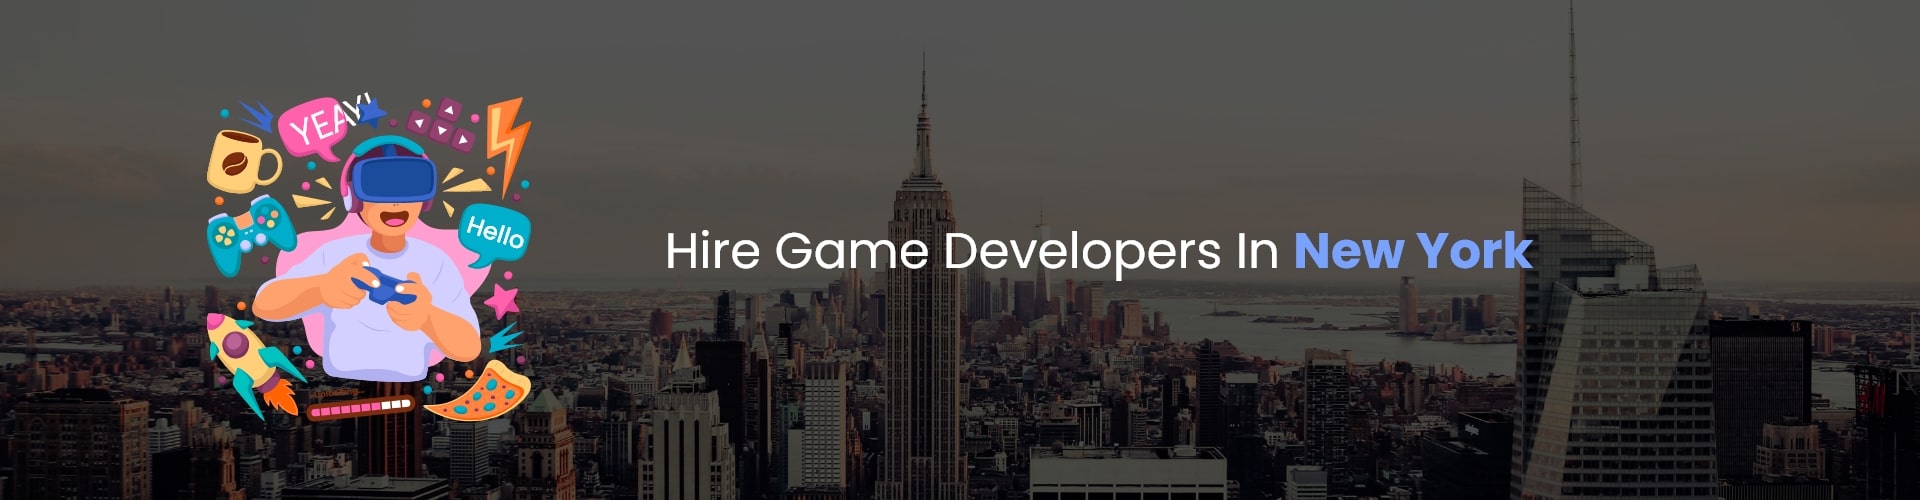 hire game developers in new york